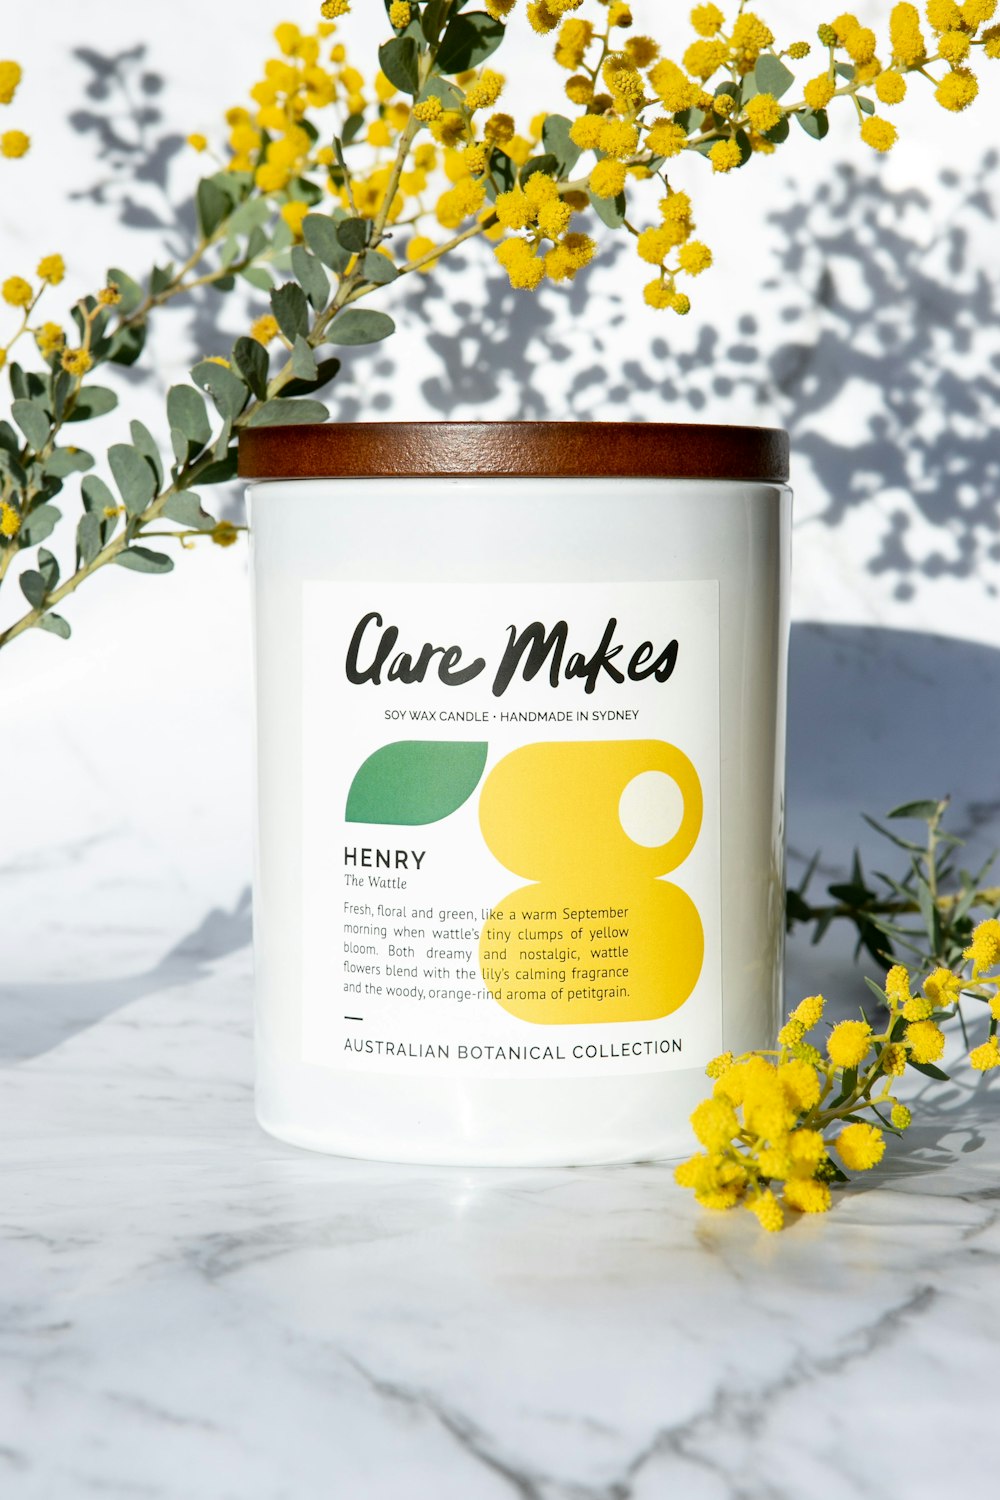 a jar with a label on it sitting next to some yellow flowers